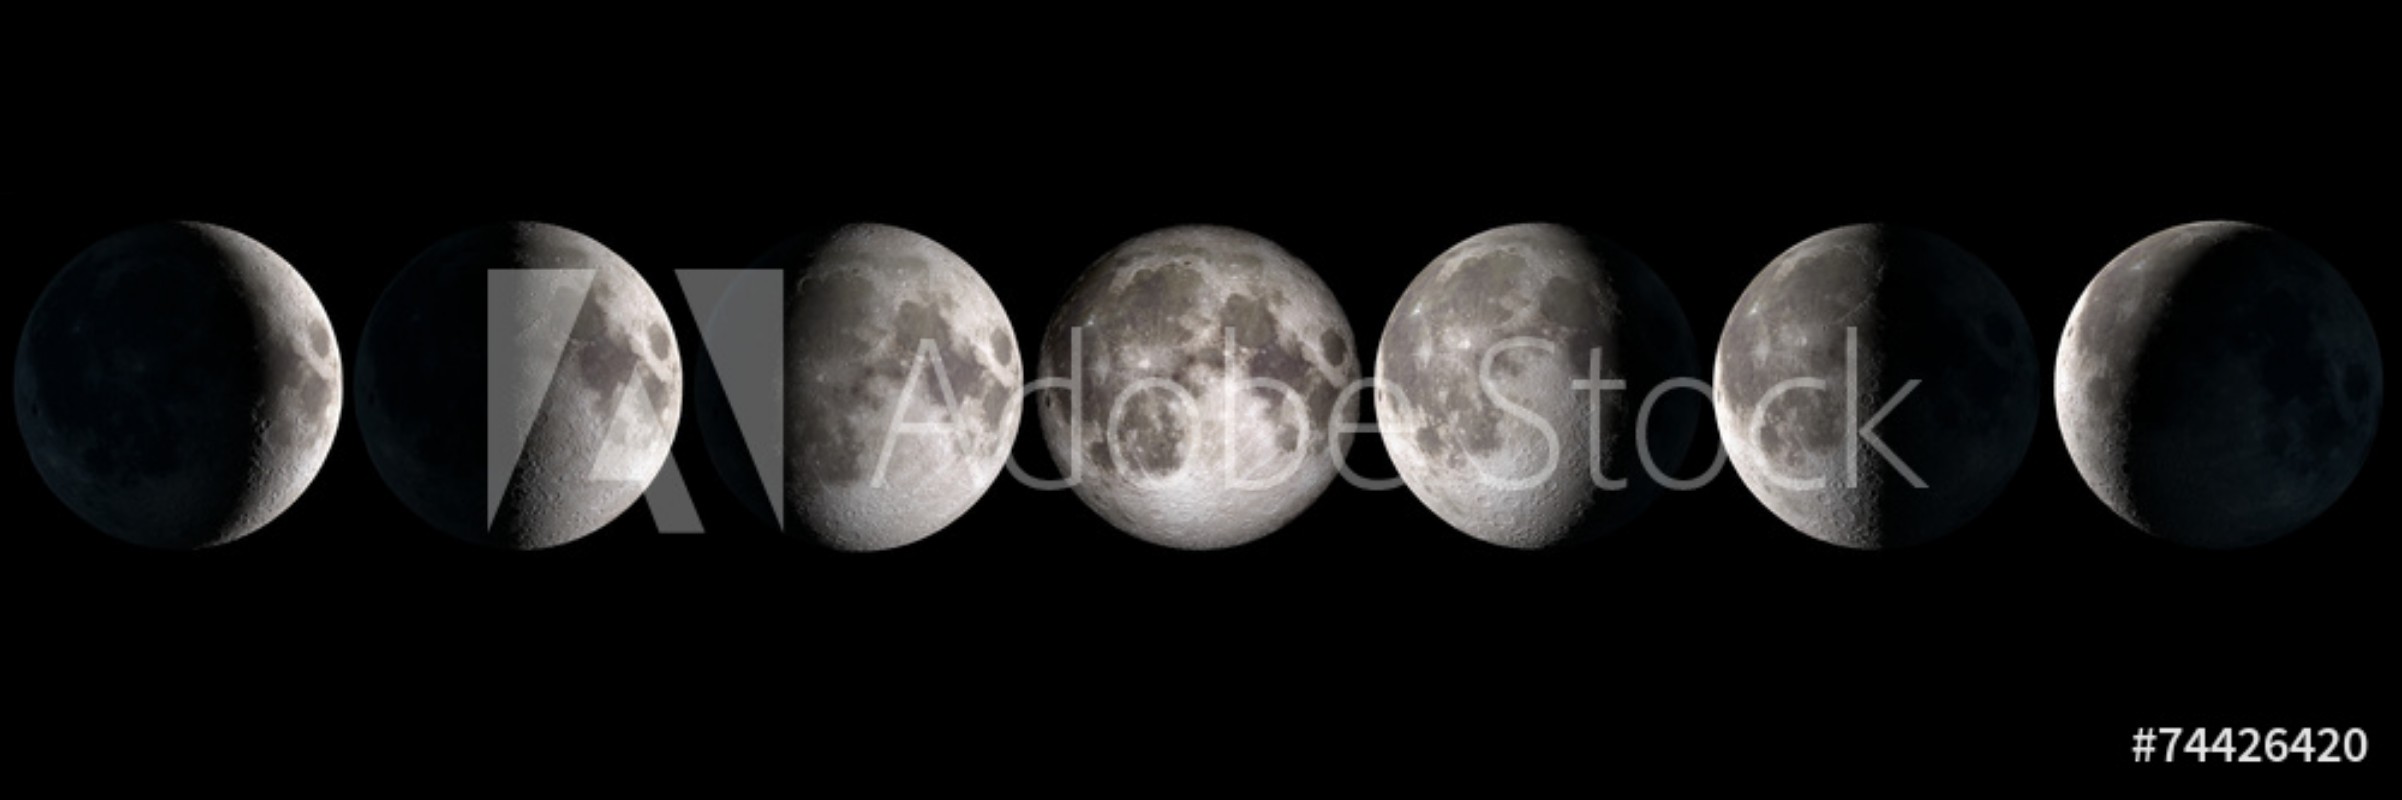 Image de Moon phases panoramic collage elements of this image are provided by NASA